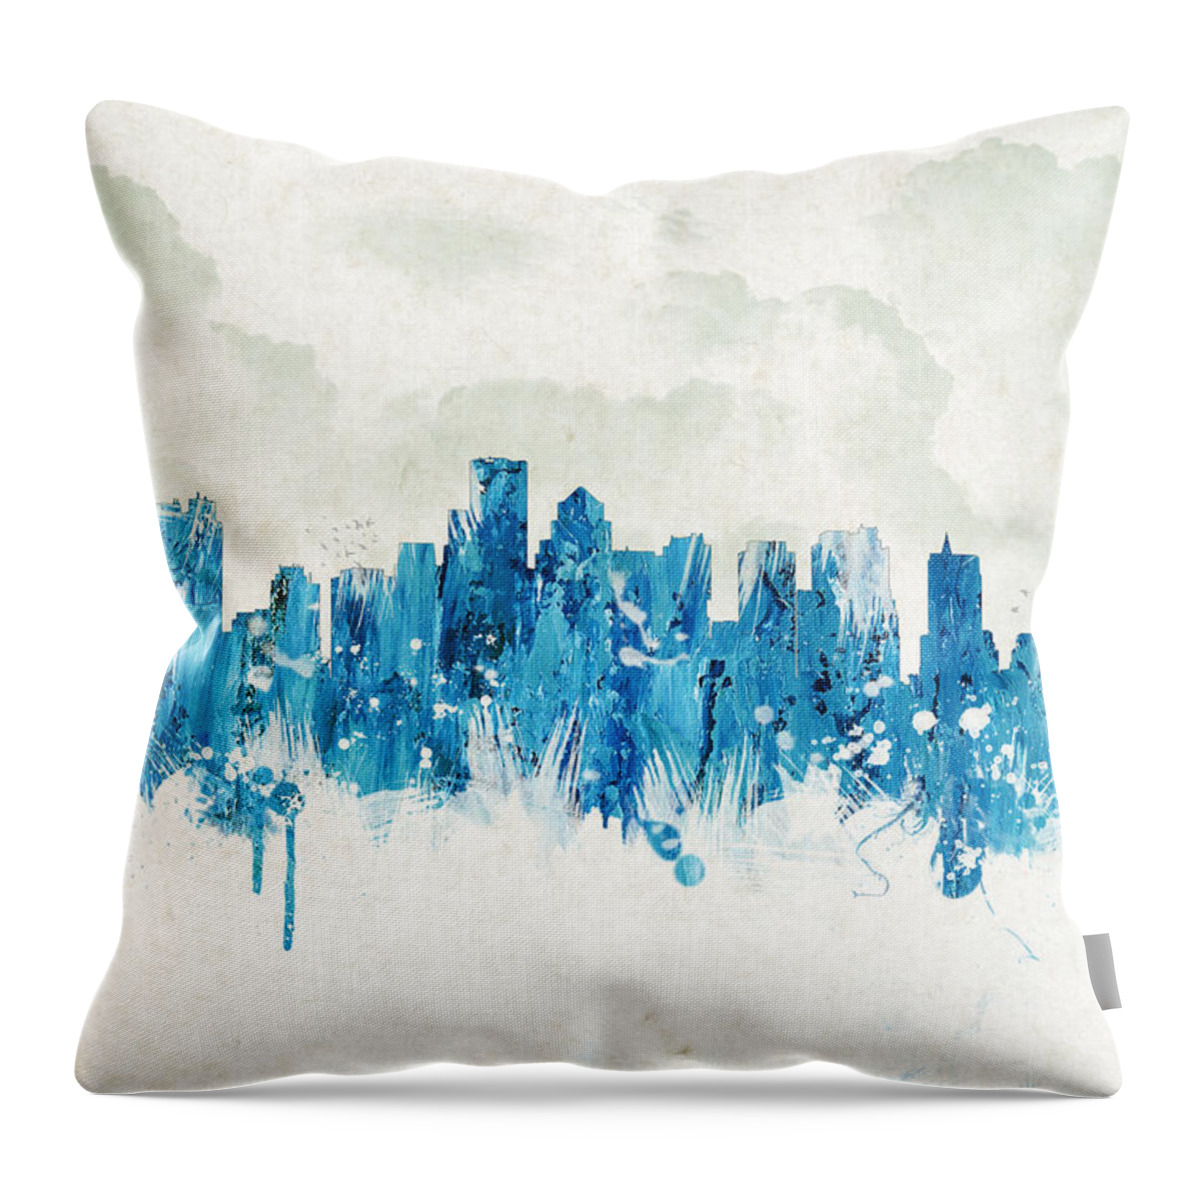  Throw Pillow featuring the digital art Clouds Over Boston Massachusetts Usa by Aged Pixel